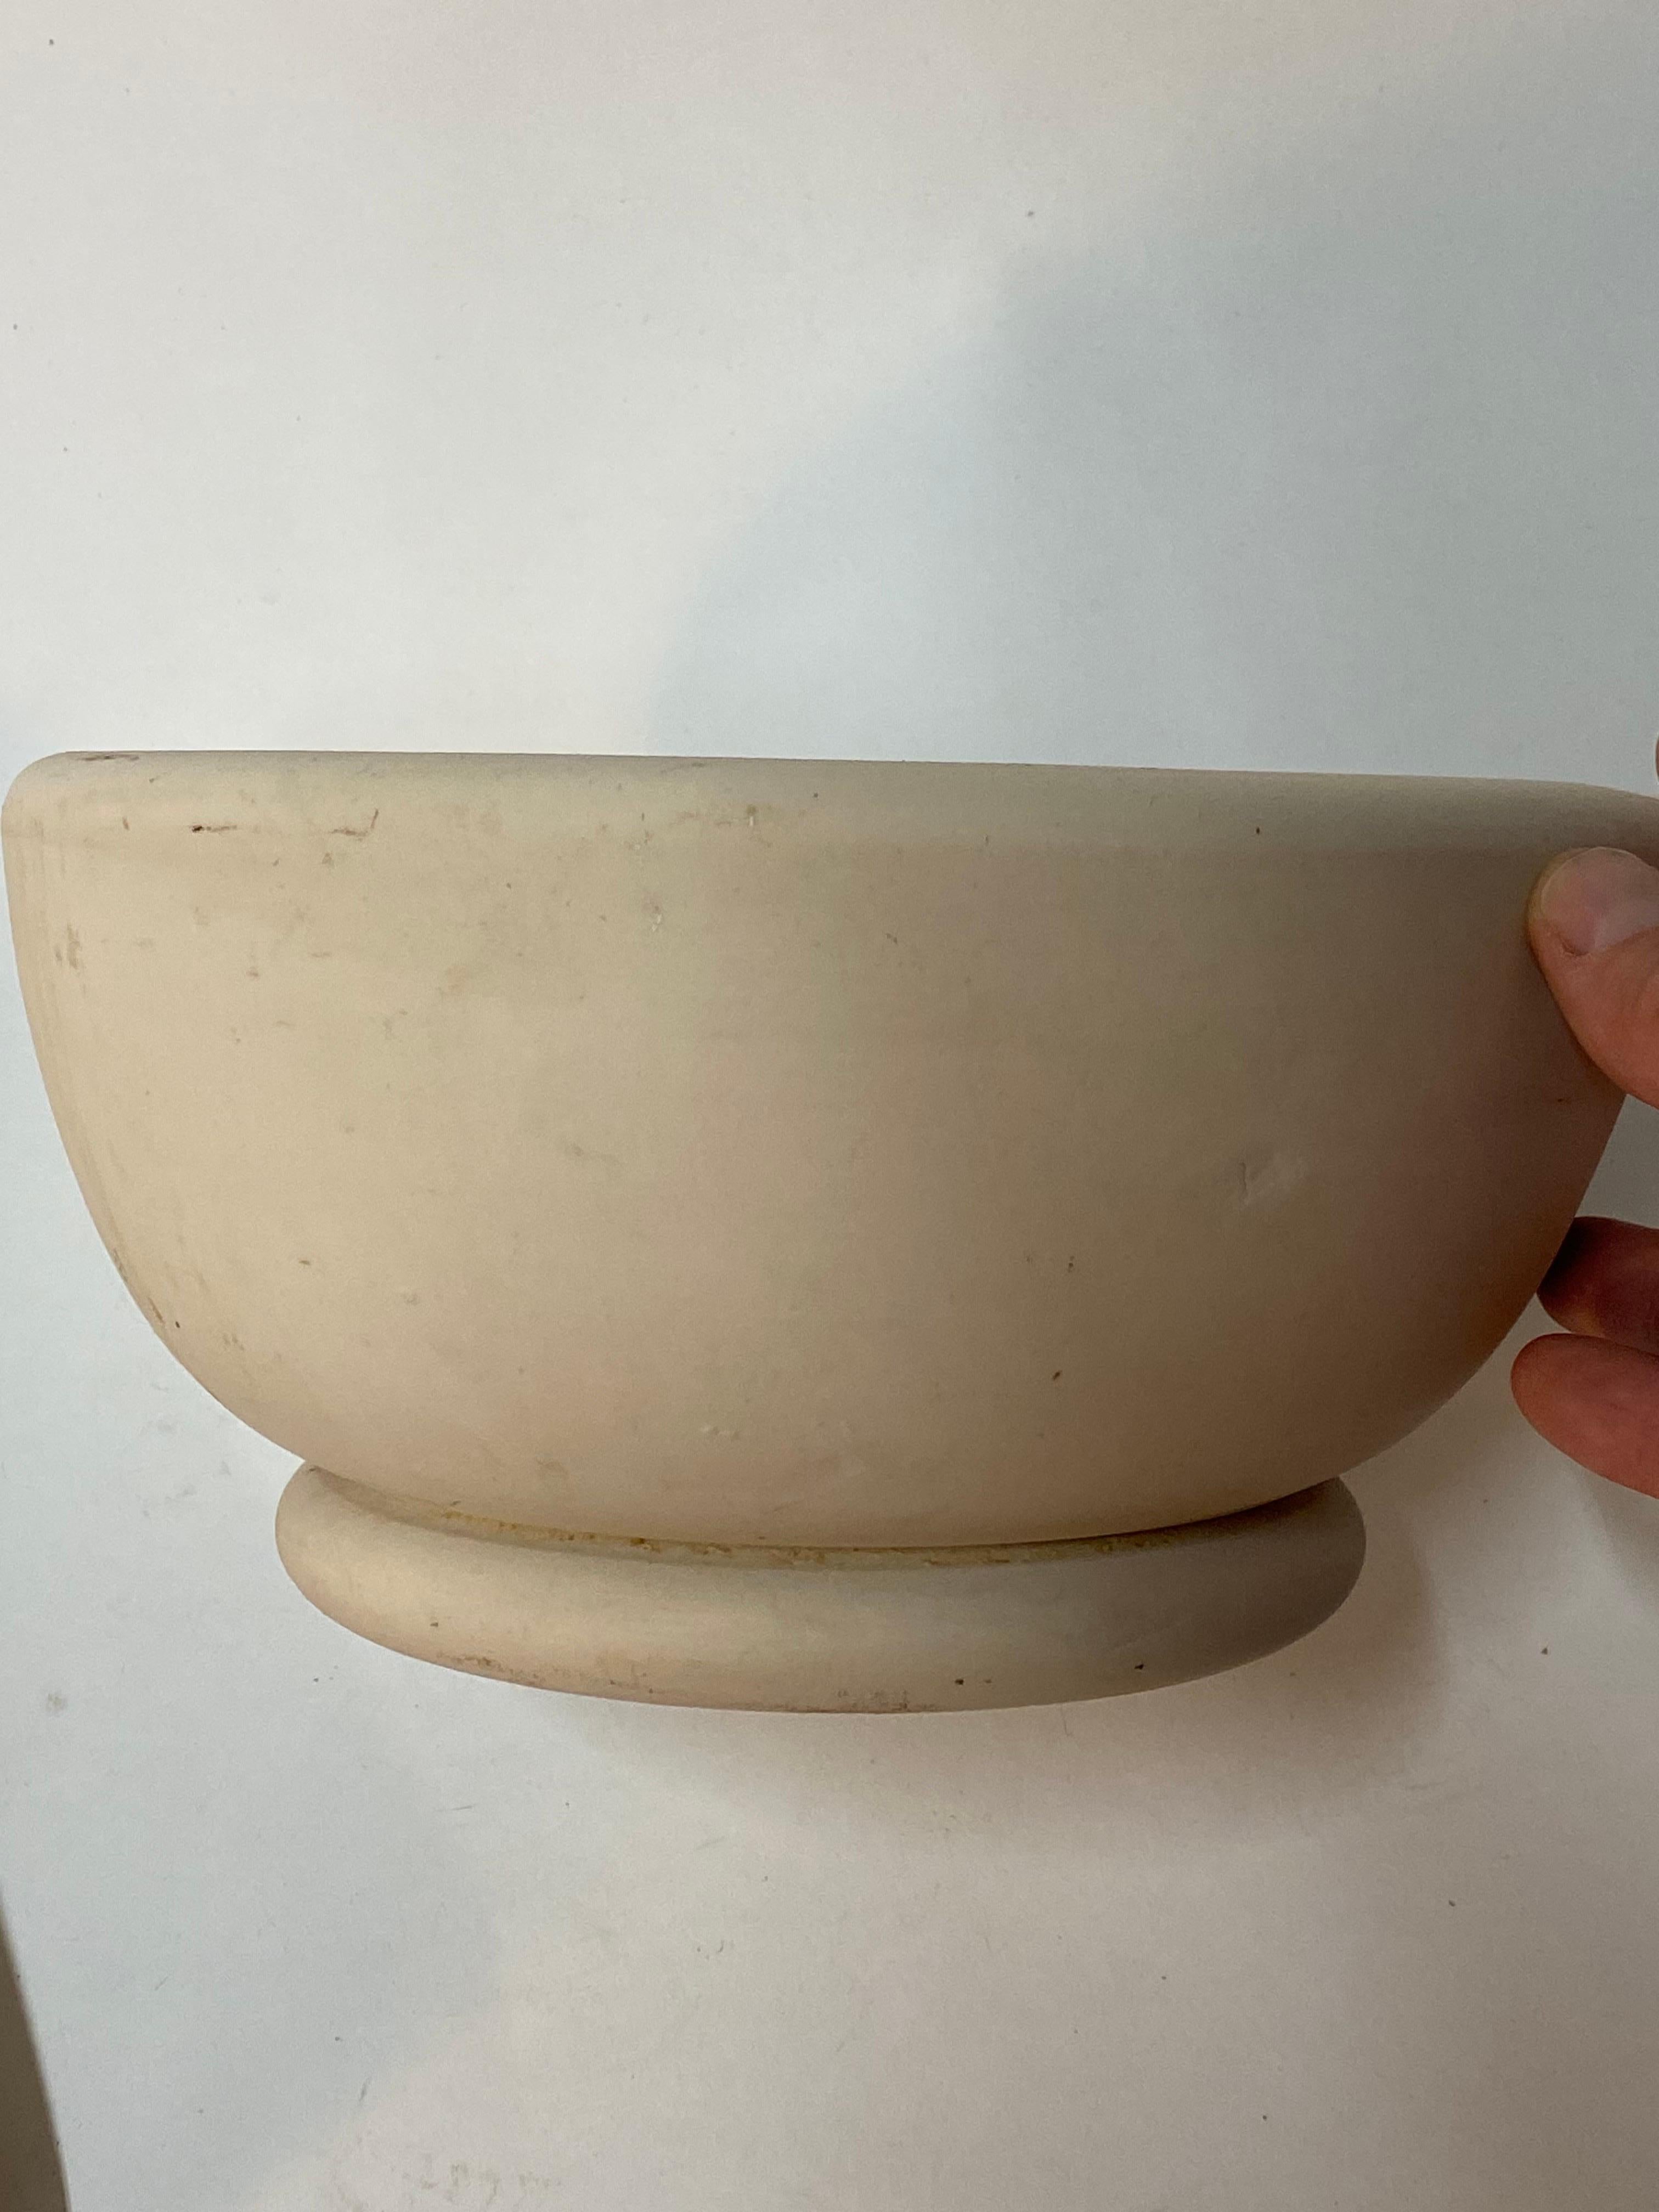 English Porcelain Mortar and Pestle #7 For Sale 3